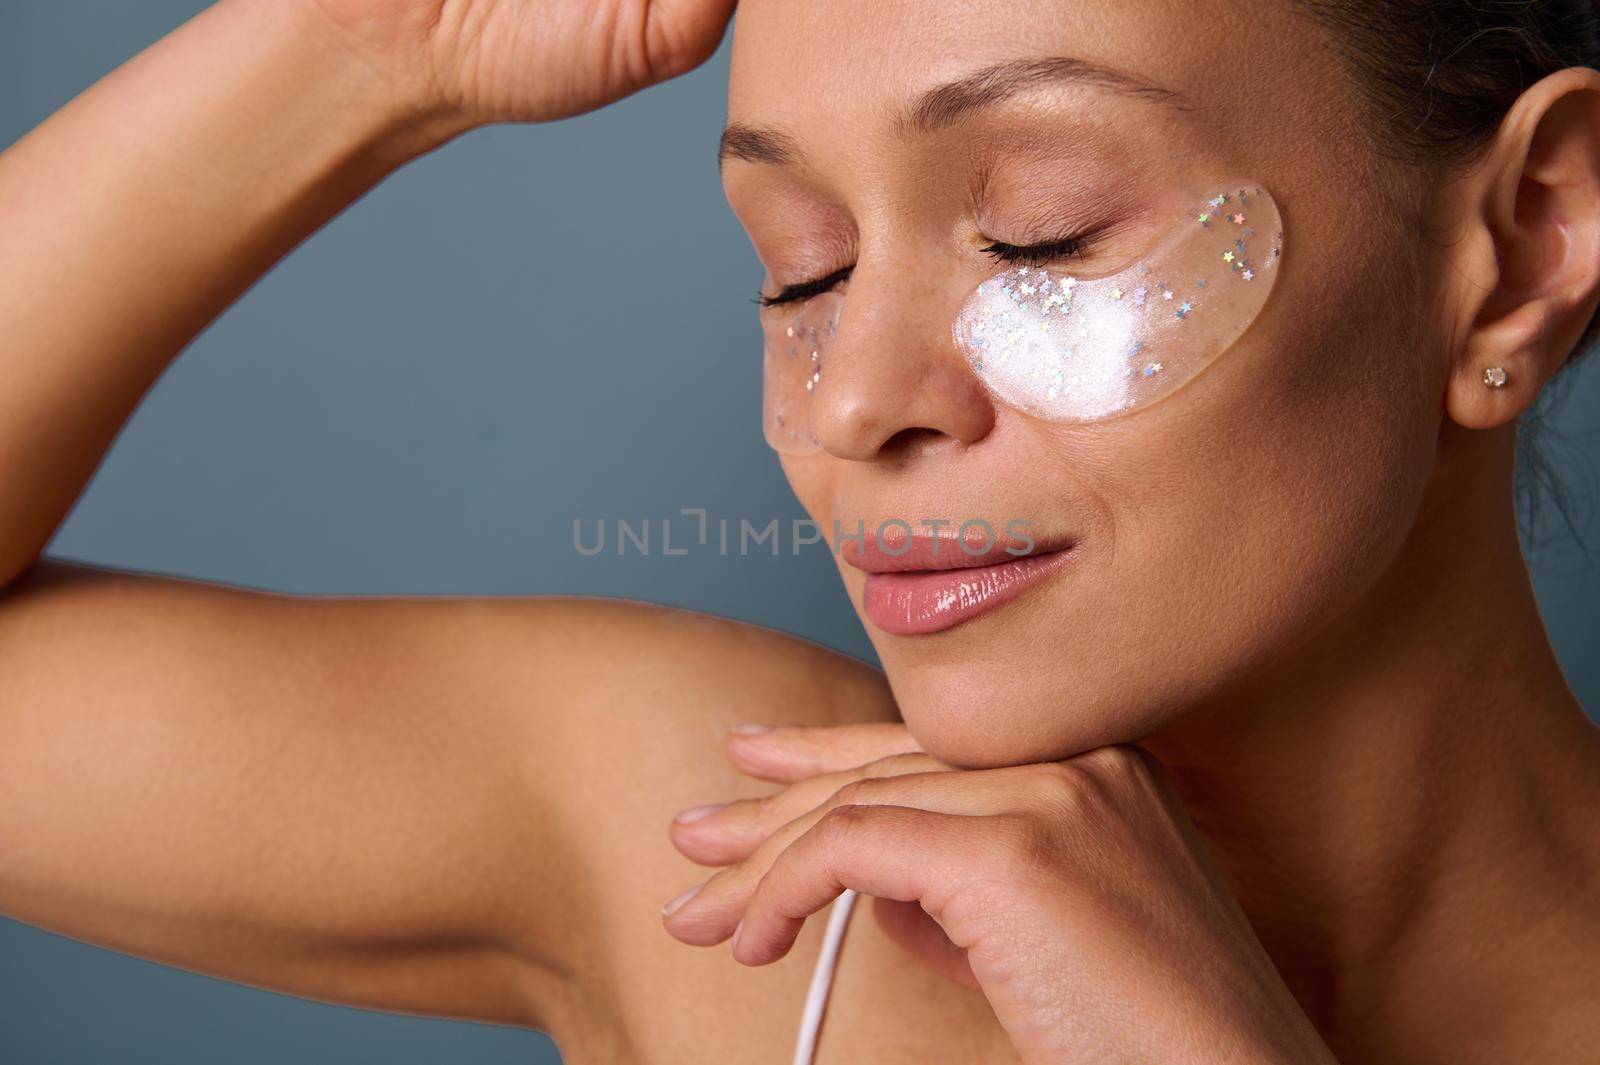 Head shot of a beautiful young woman with perfect glowing skin and natural makeup posing for the camera with medical collagen patches under her eyes to reduce fatigue and puffiness. Skin care concept